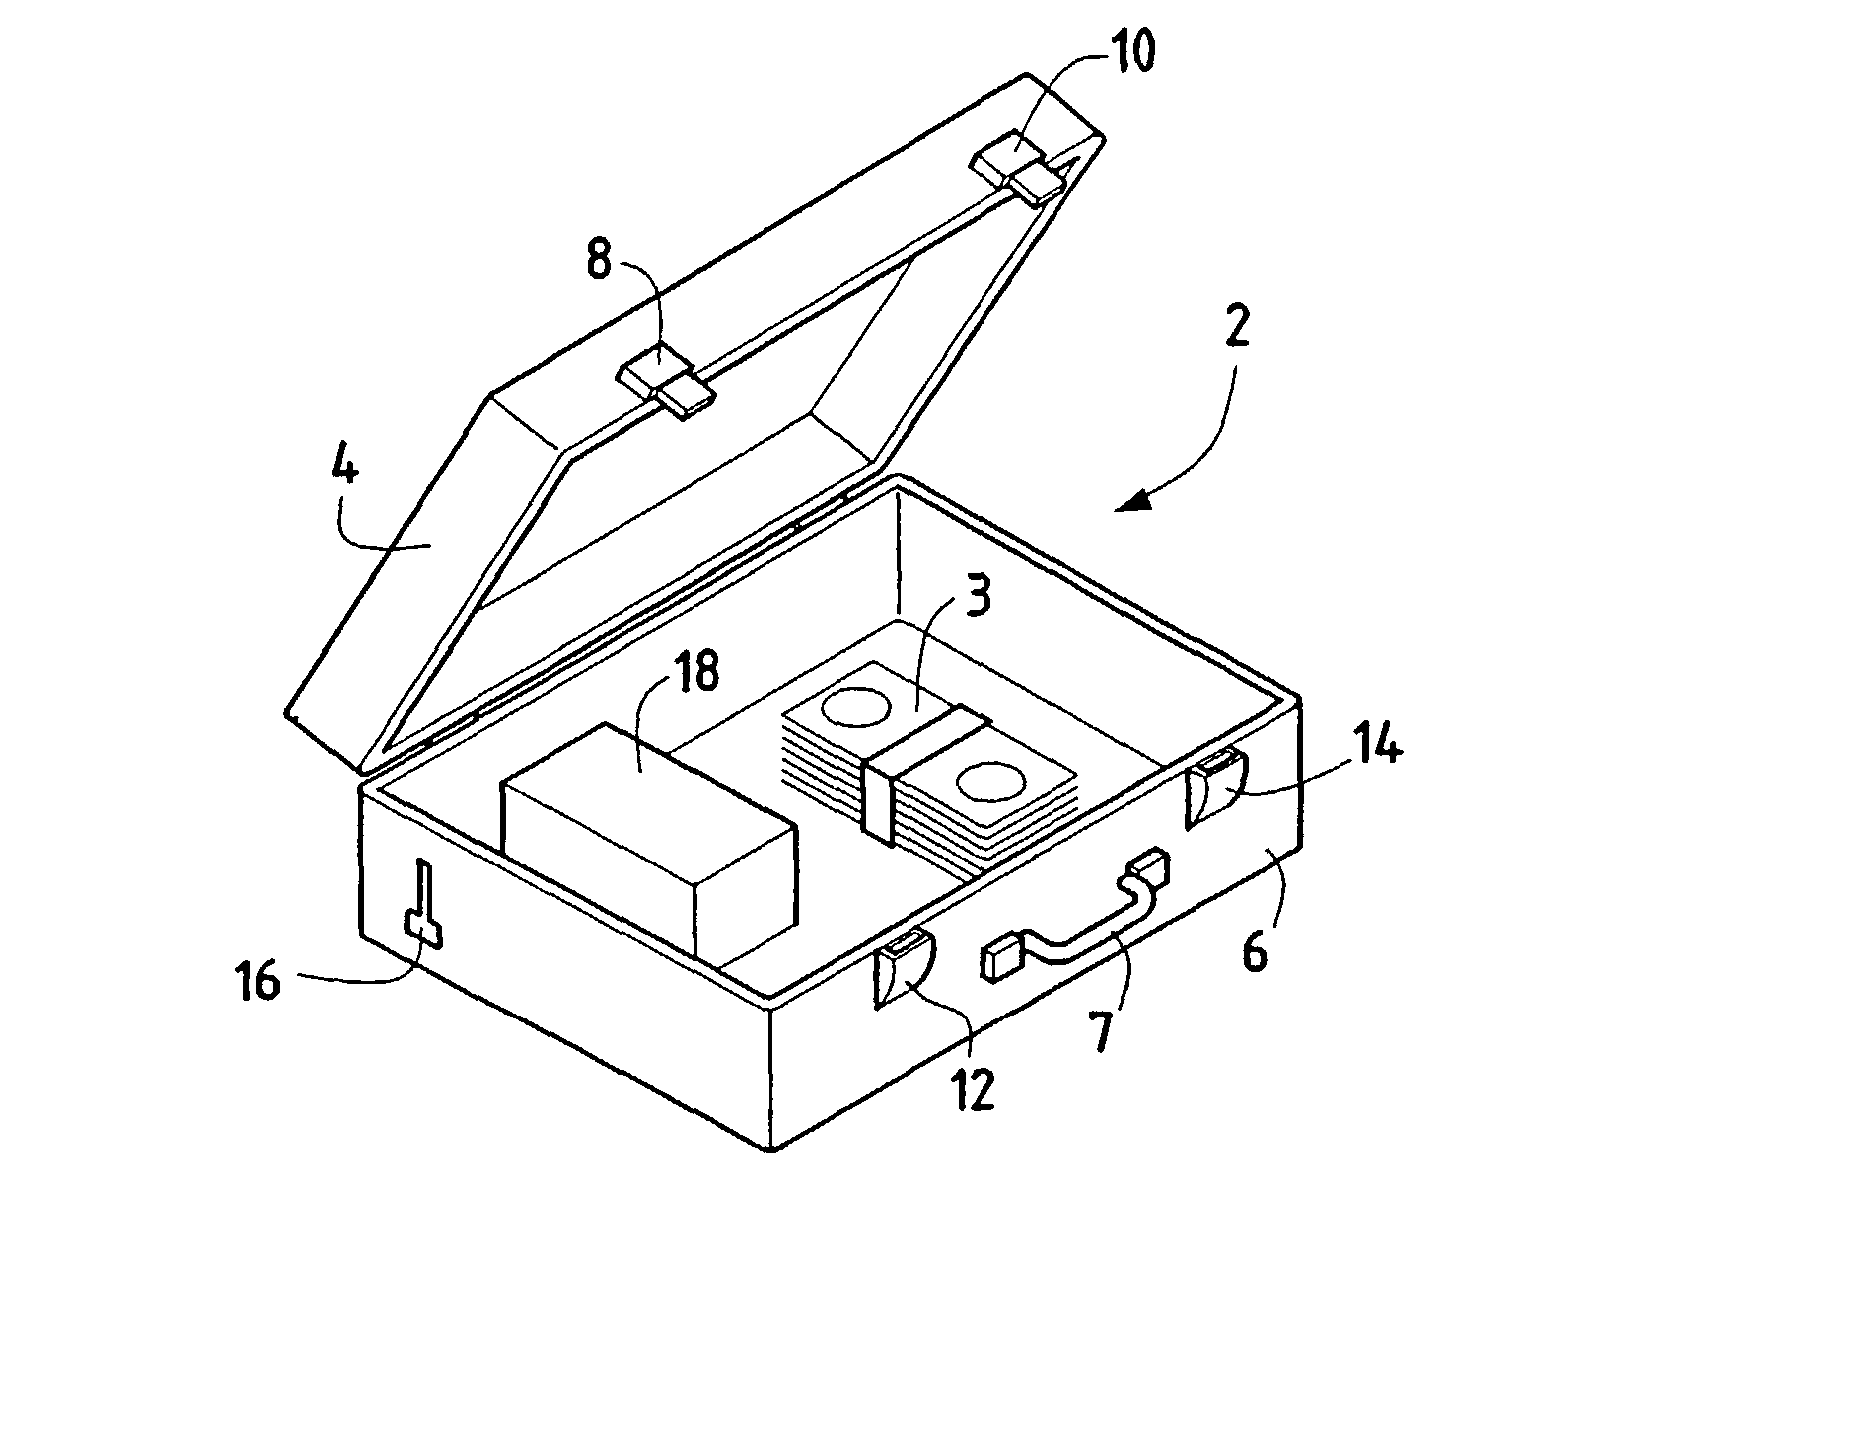 Device and method for safe transport on an object